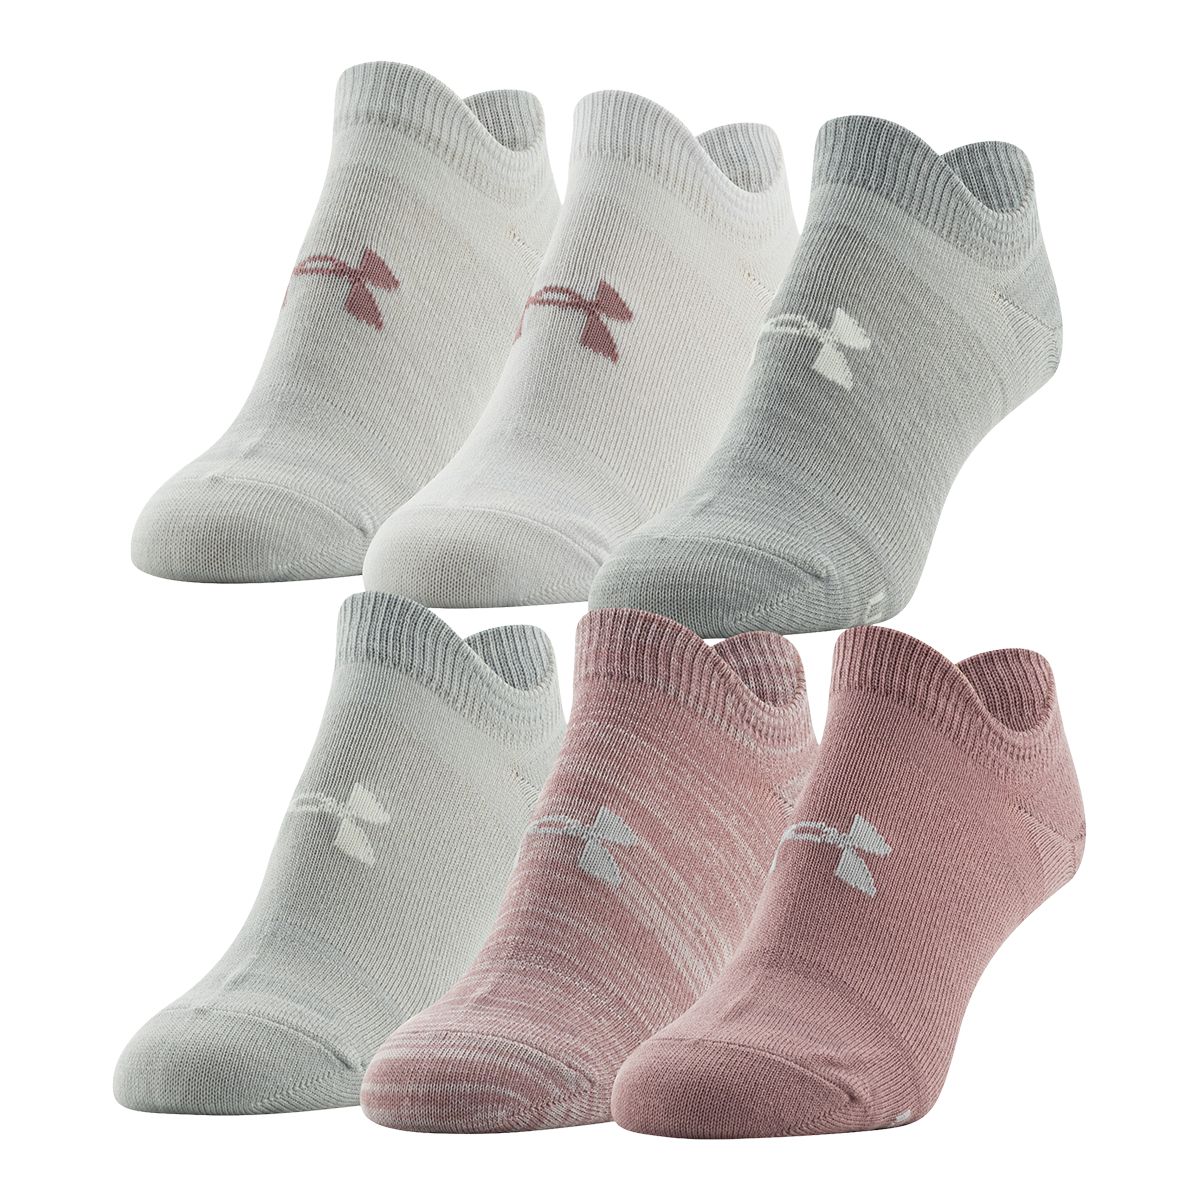 Under Armour Women's Essential 3.0 No Show Socks - 6 Pack